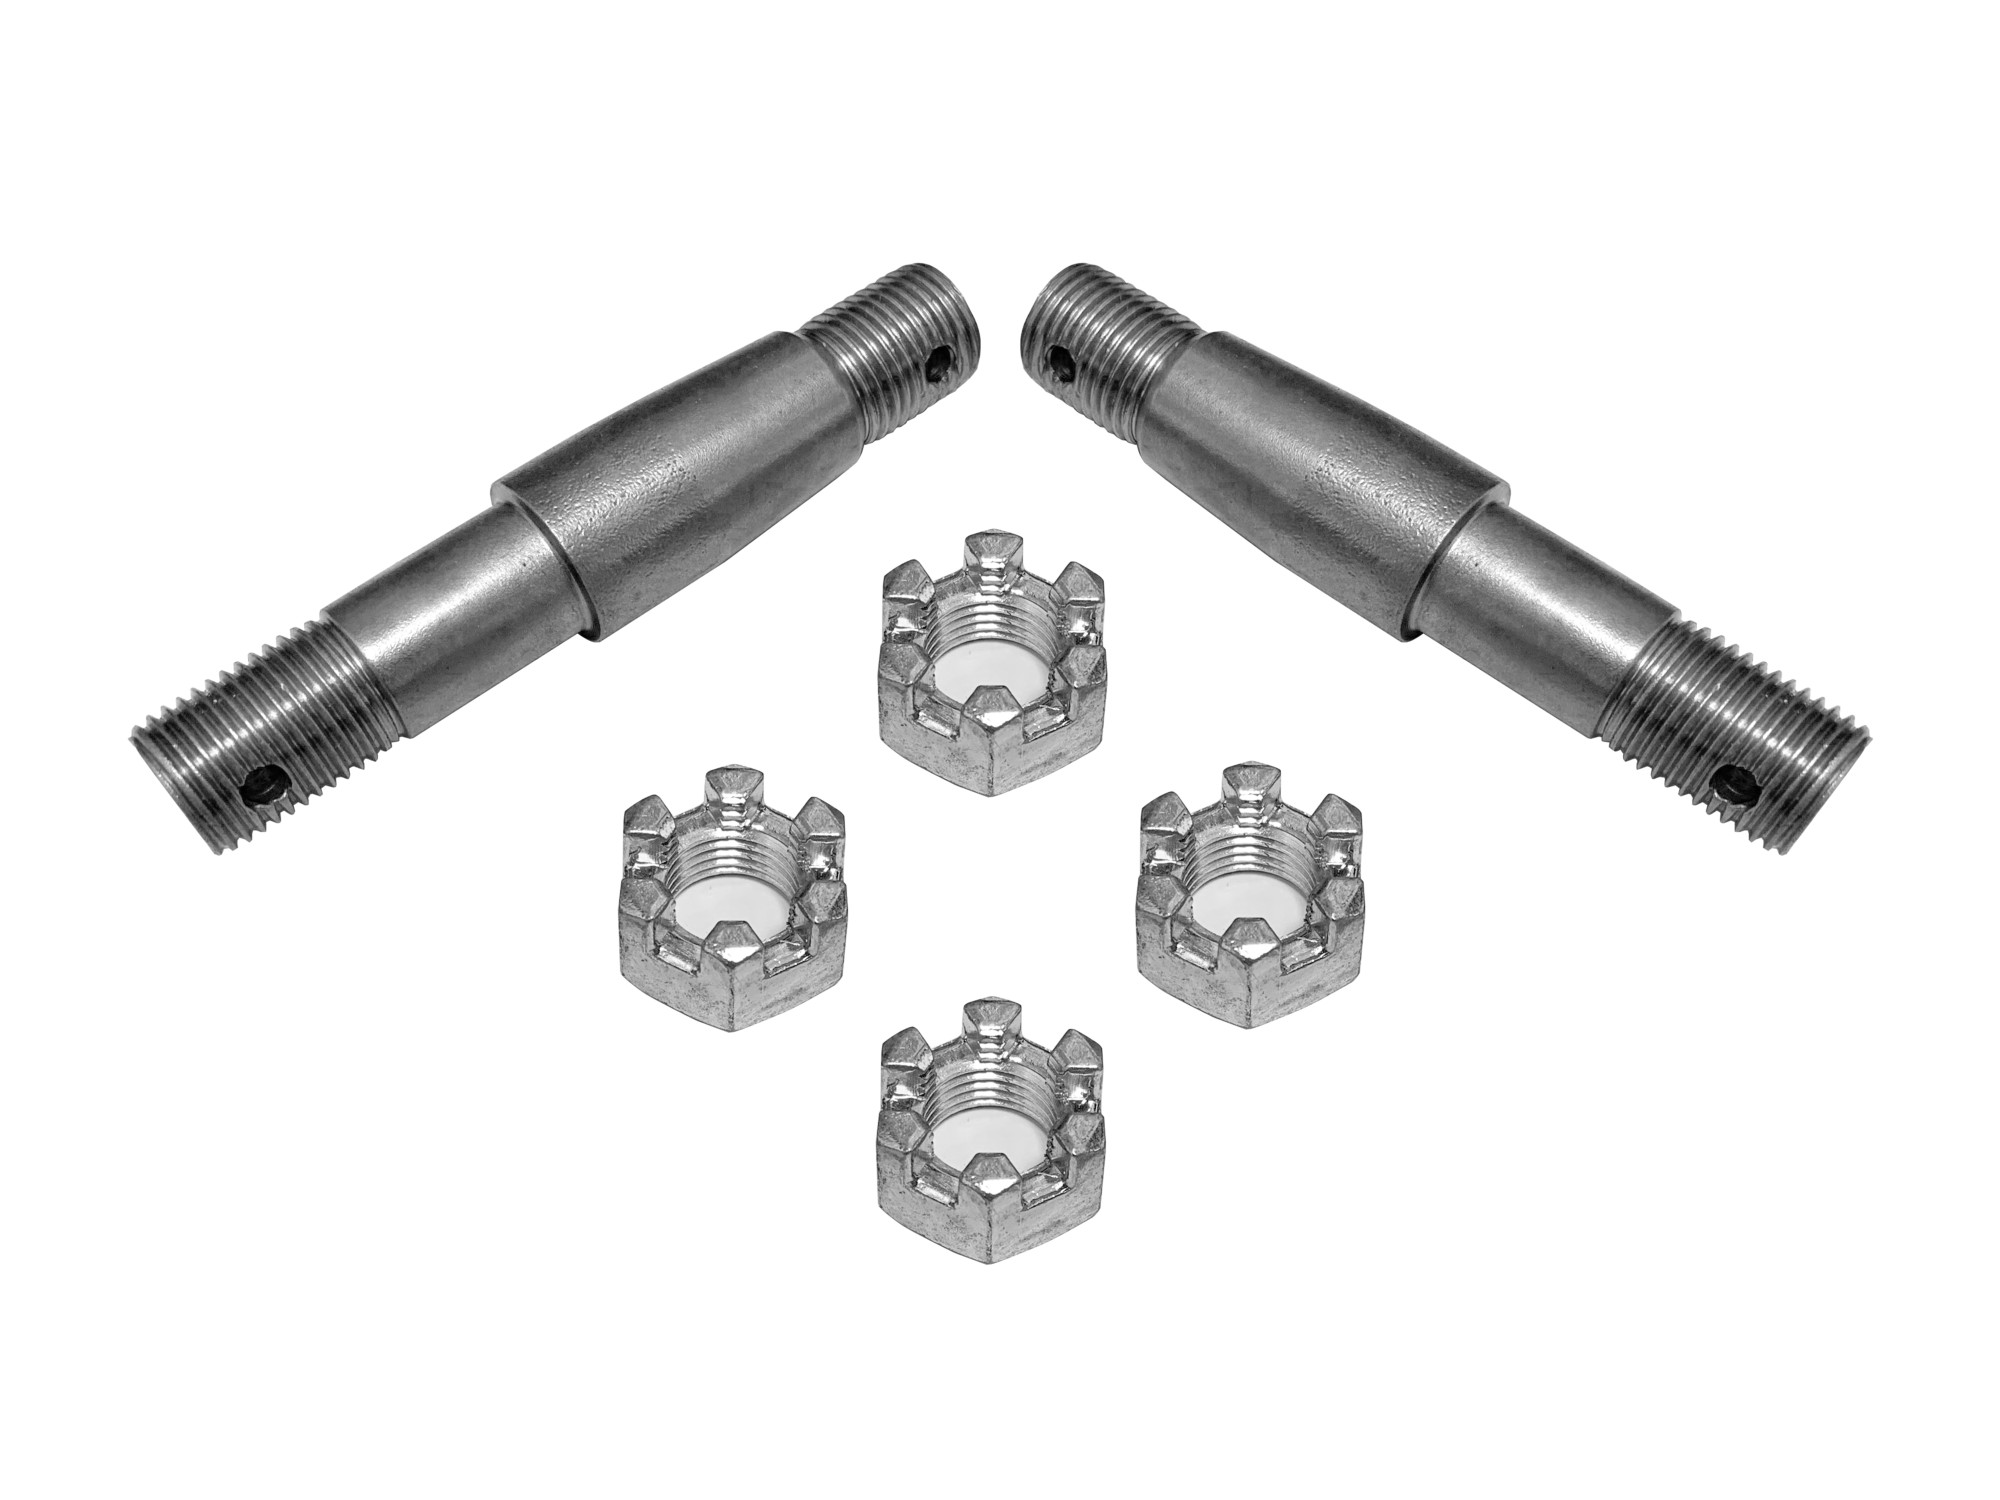 Adapter Bolt - Includes Castle Nuts AFCO Racing